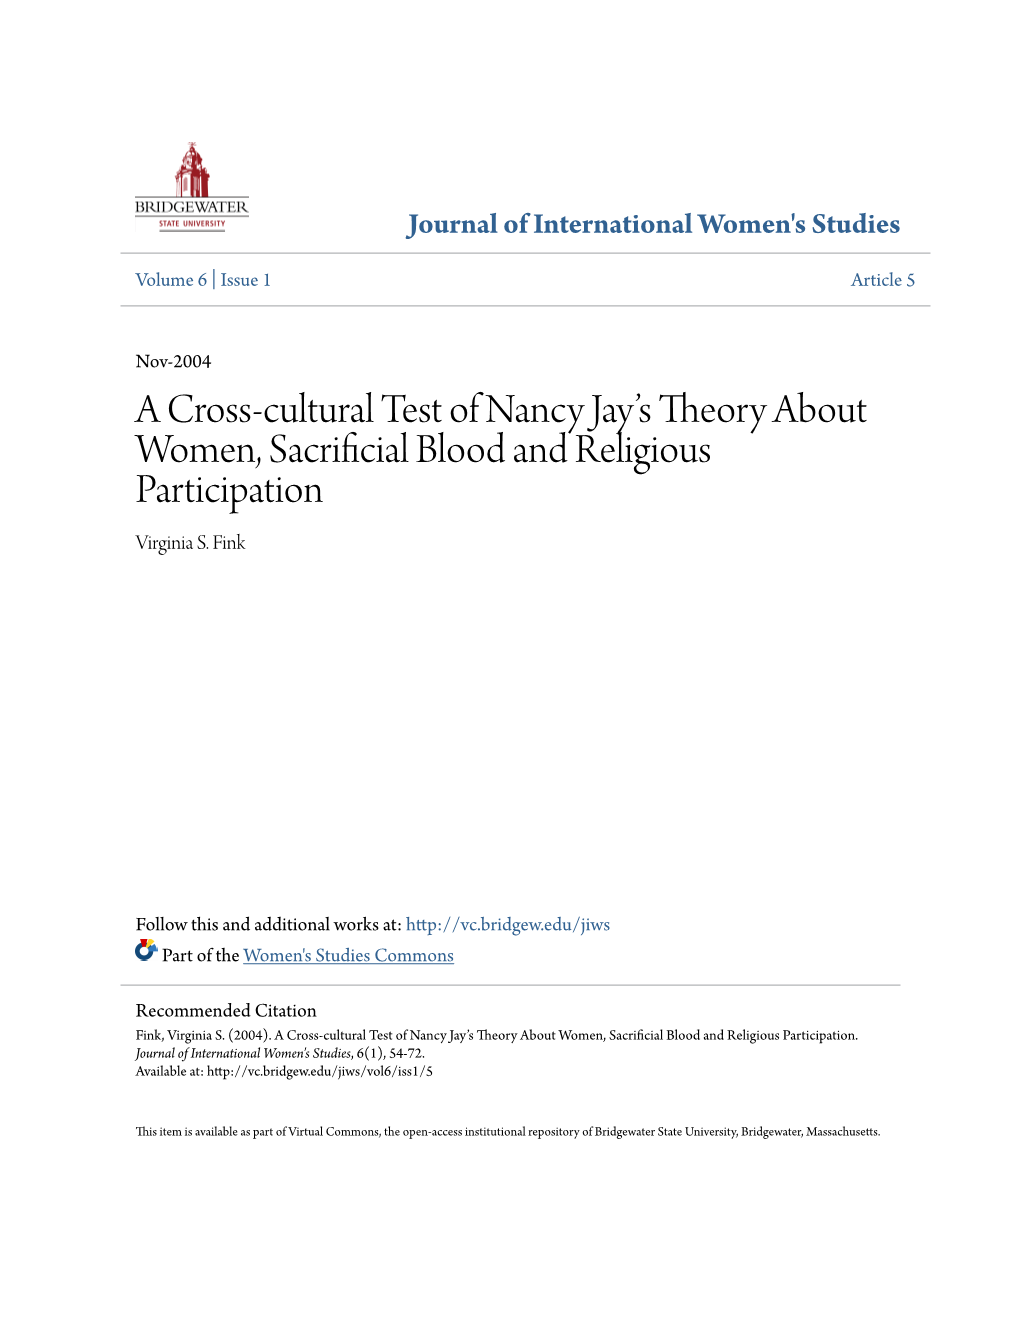 A Cross-Cultural Test of Nancy Jay's Theory About Women, Sacrificial